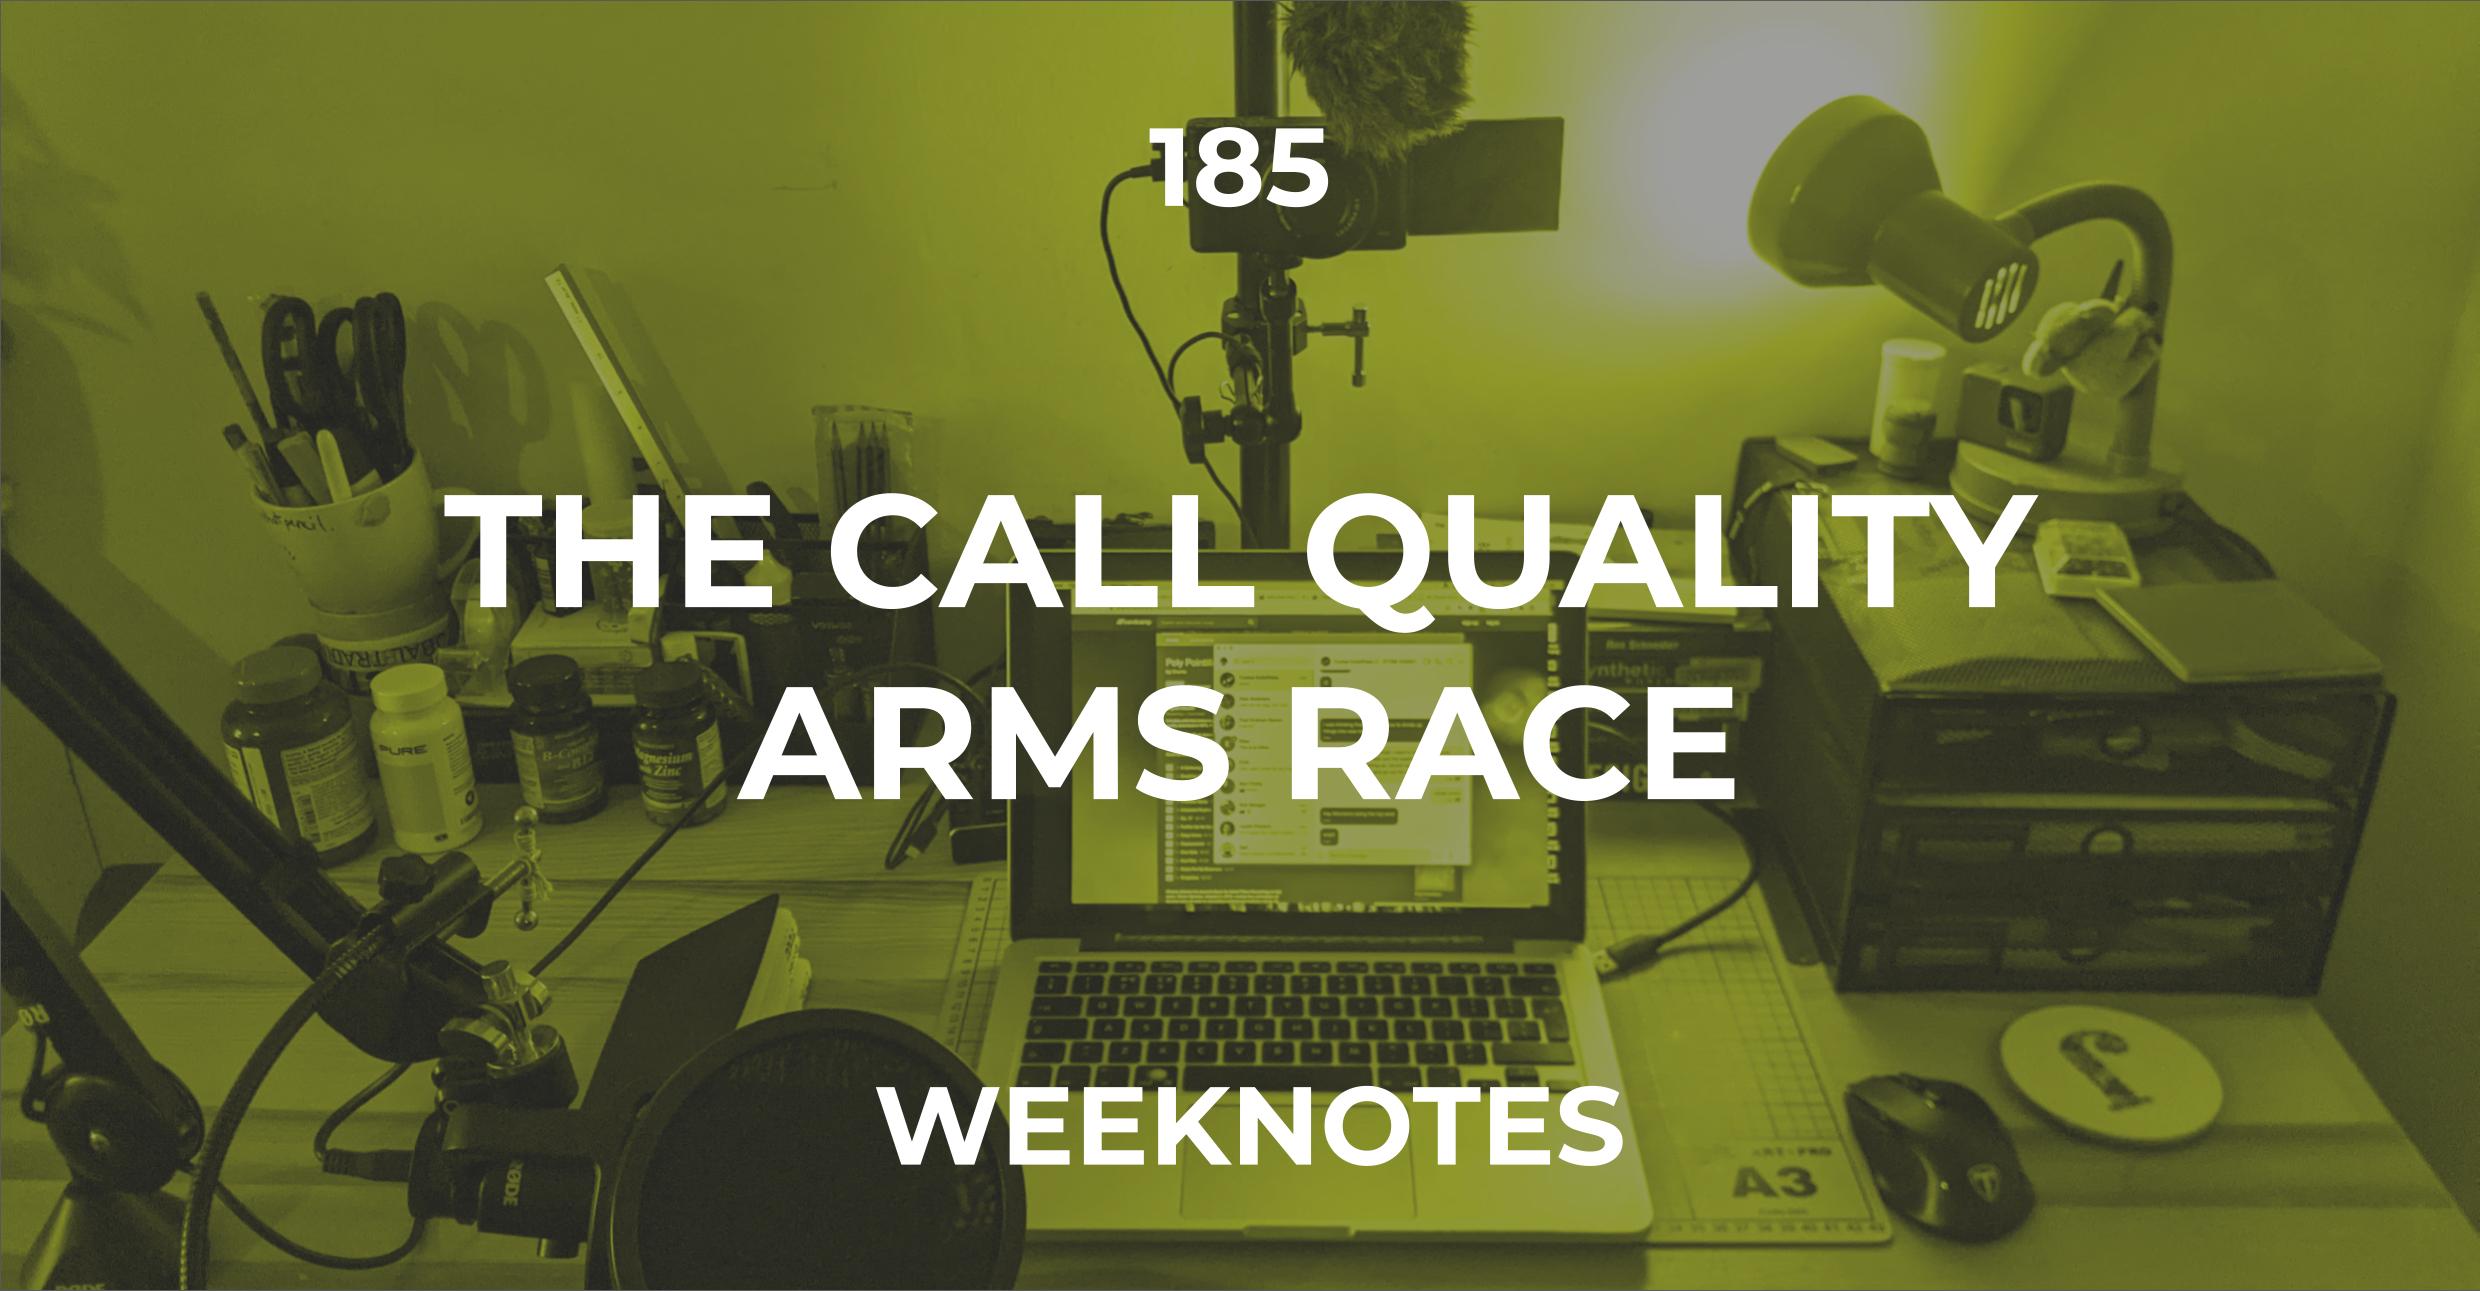 The Call Quality Arms Race